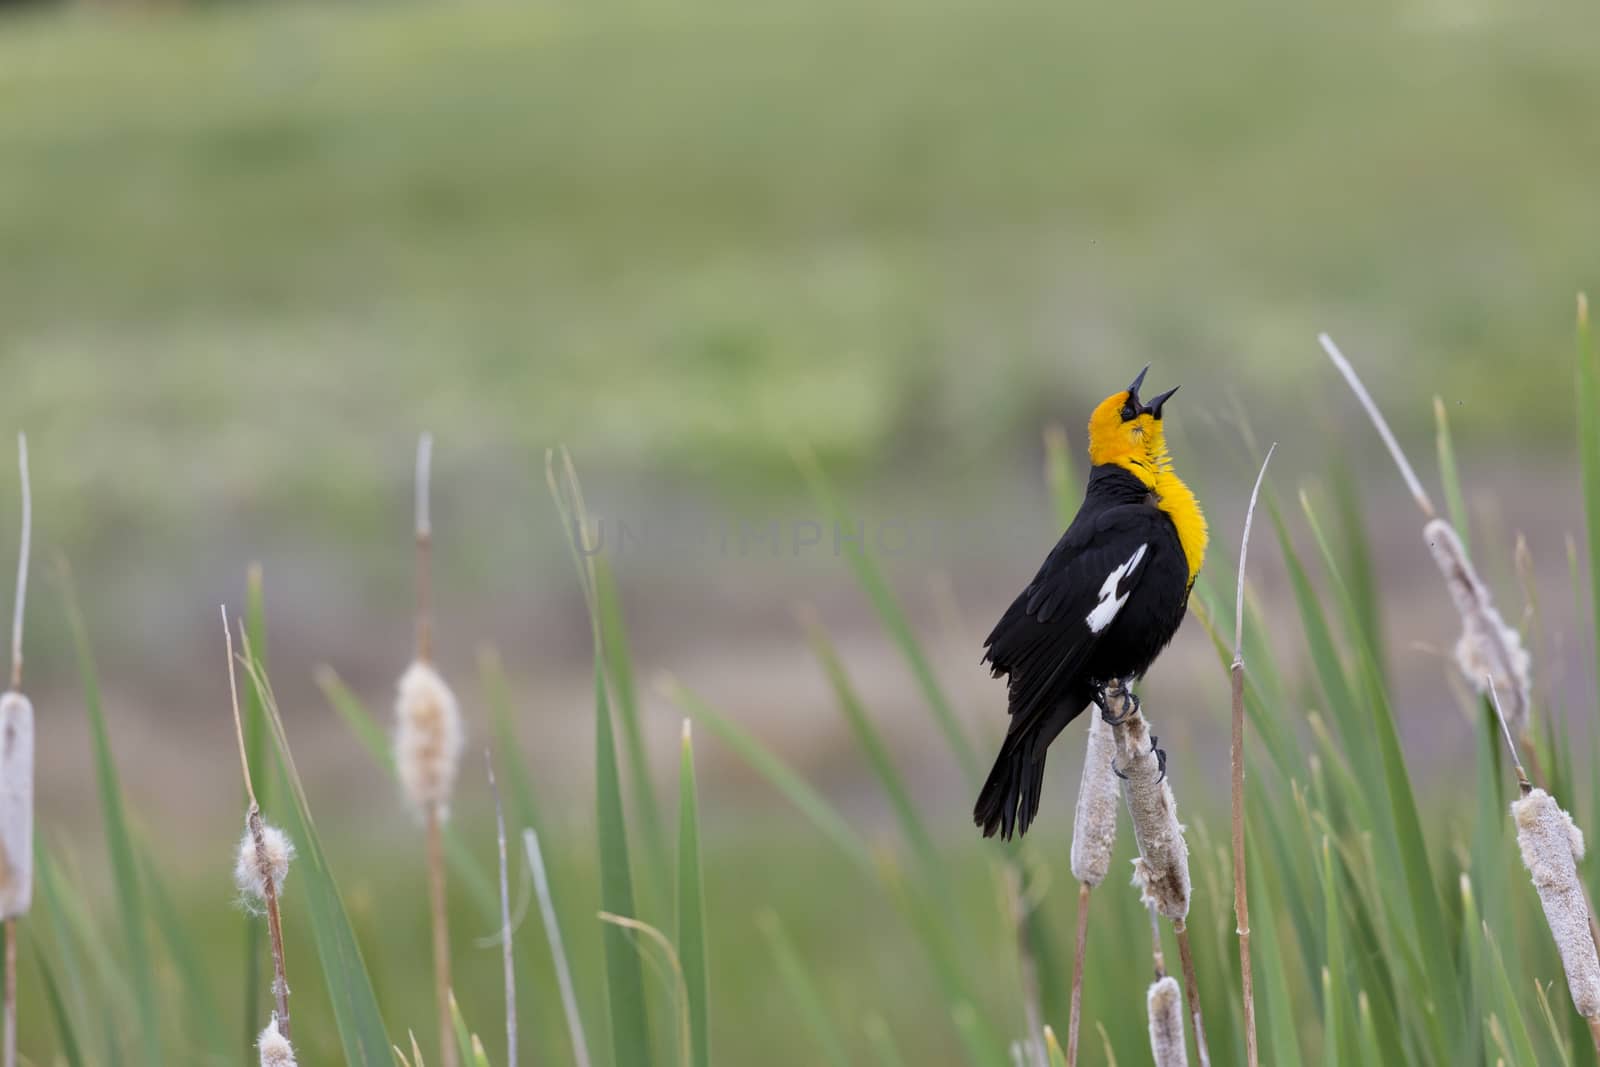 Exuberant song of yellow headed blackbird perched on cat tail stem at Farmington Bay, Utah. Horizontal image with copy space. 